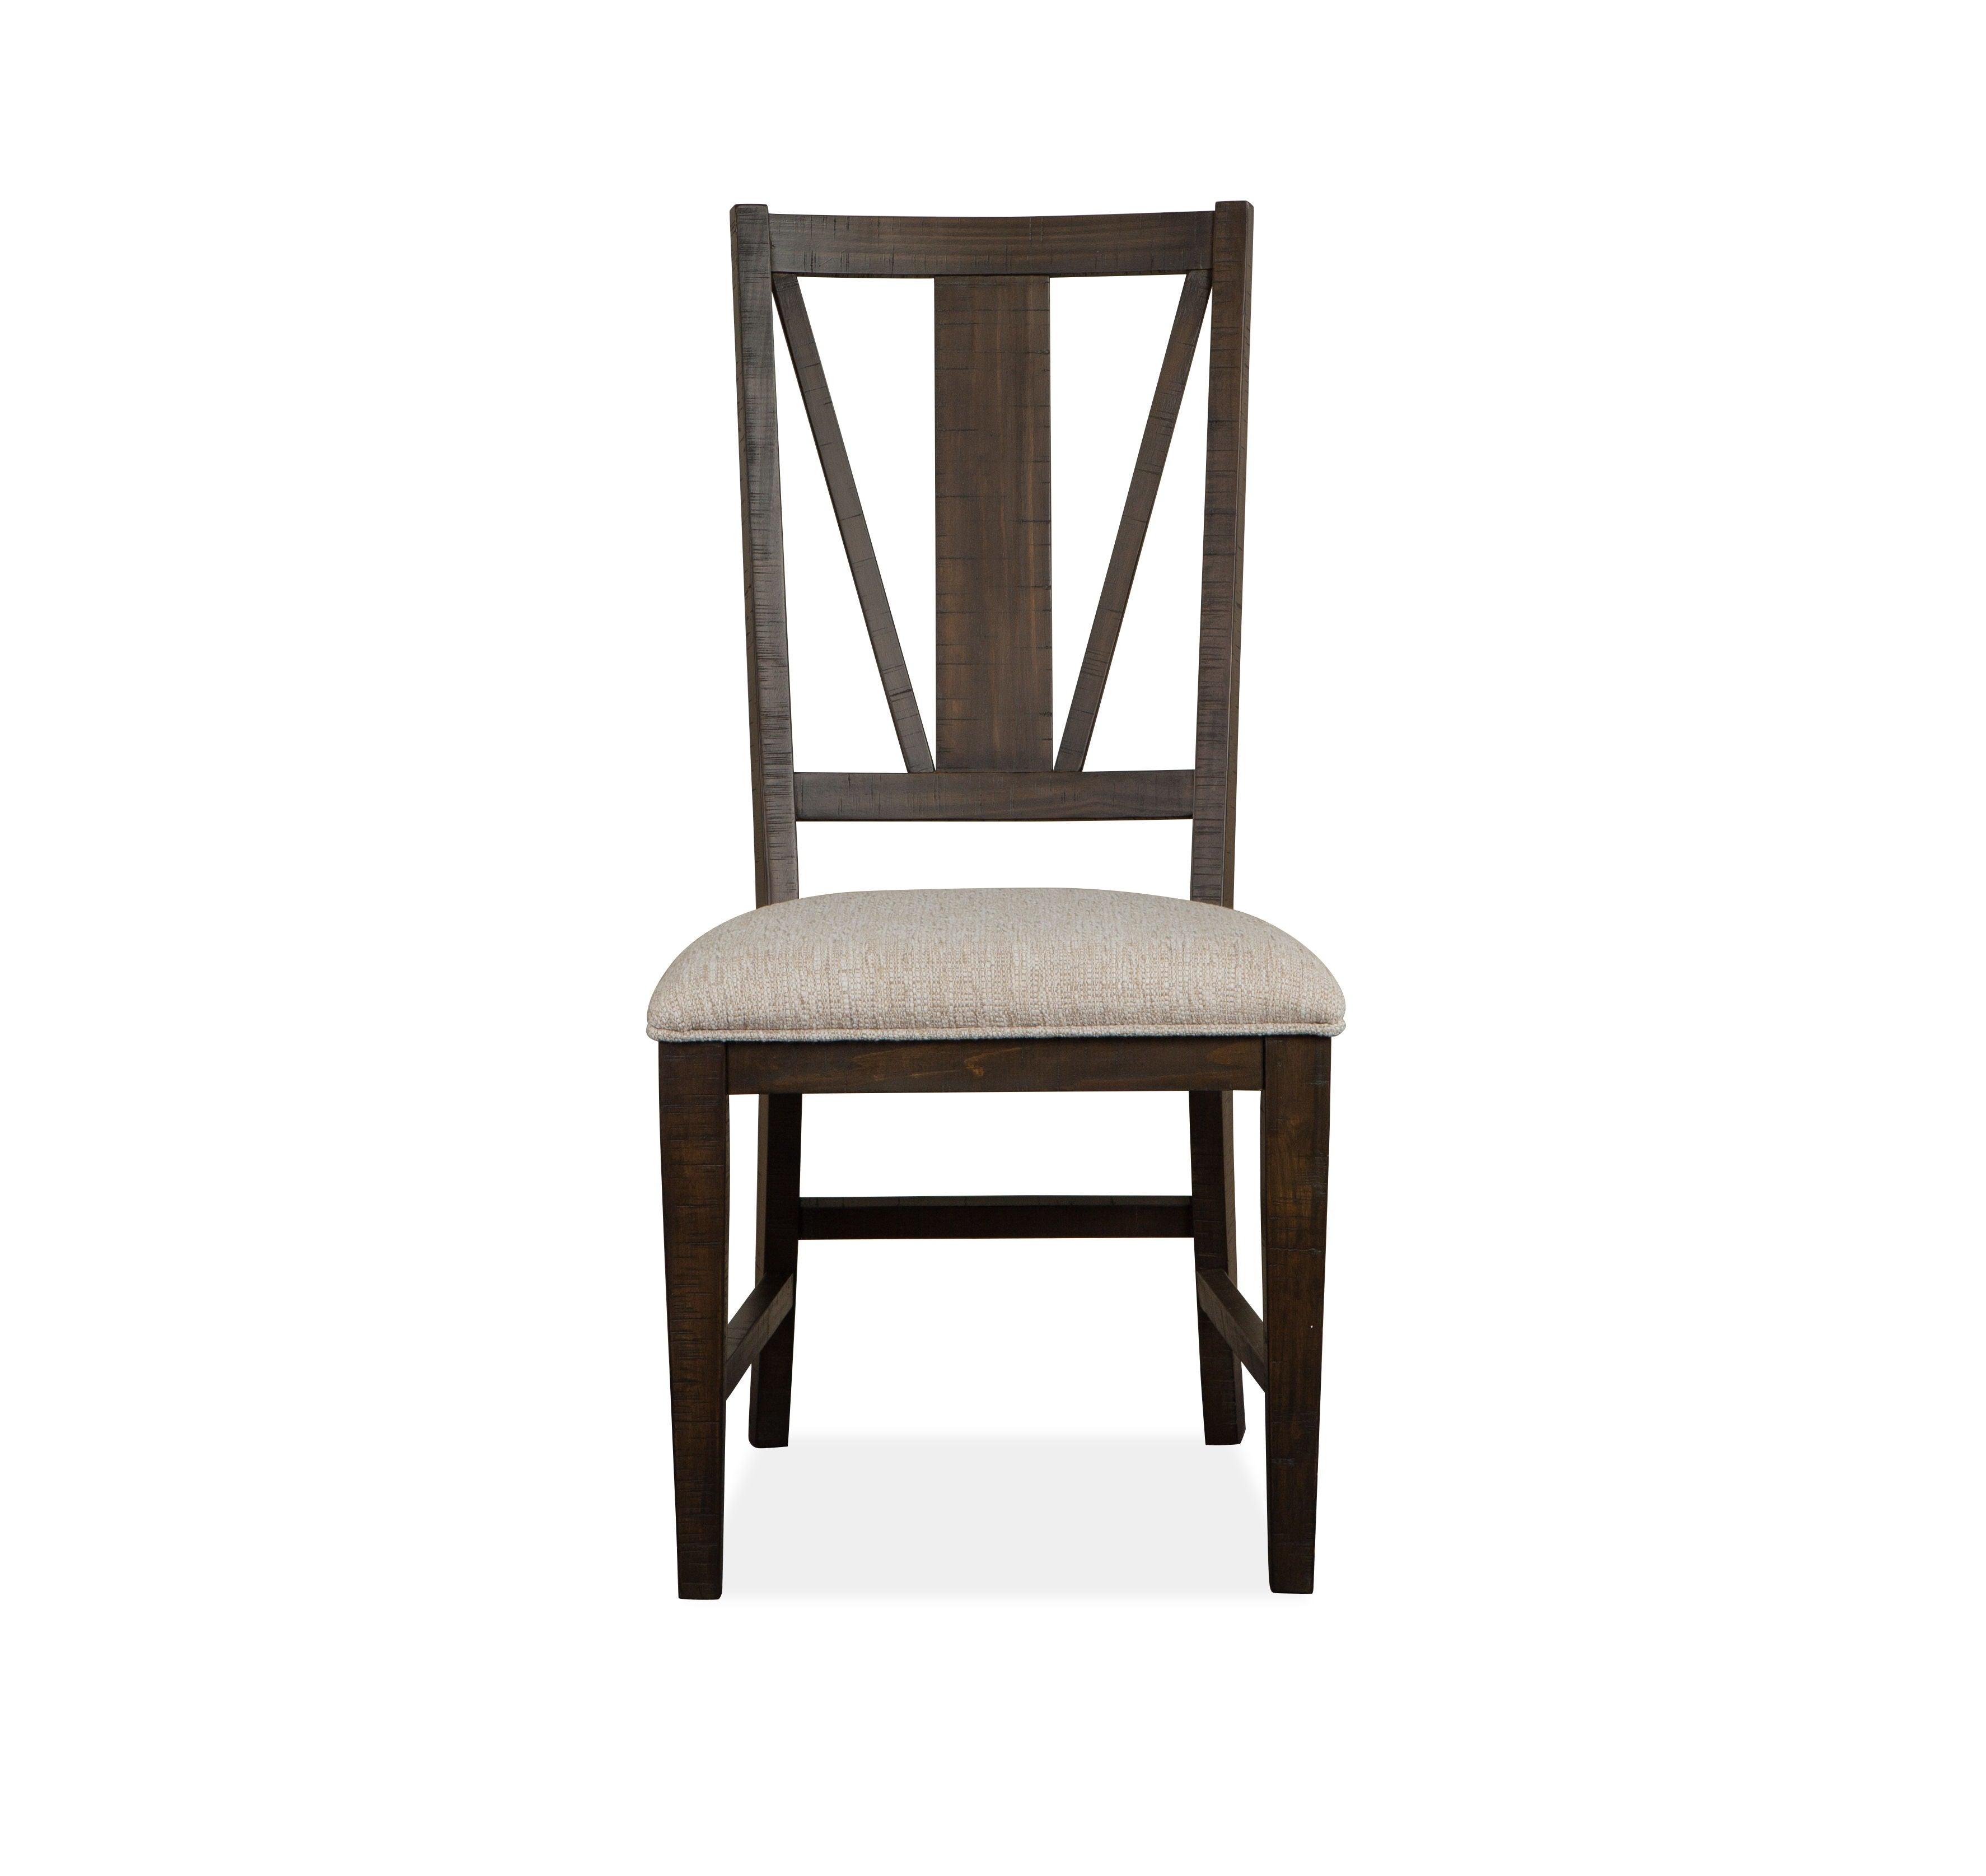 Magnussen Furniture - Westley Falls - Dining Side Chair With Upholstered Seat (Set of 2) - Graphite - 5th Avenue Furniture